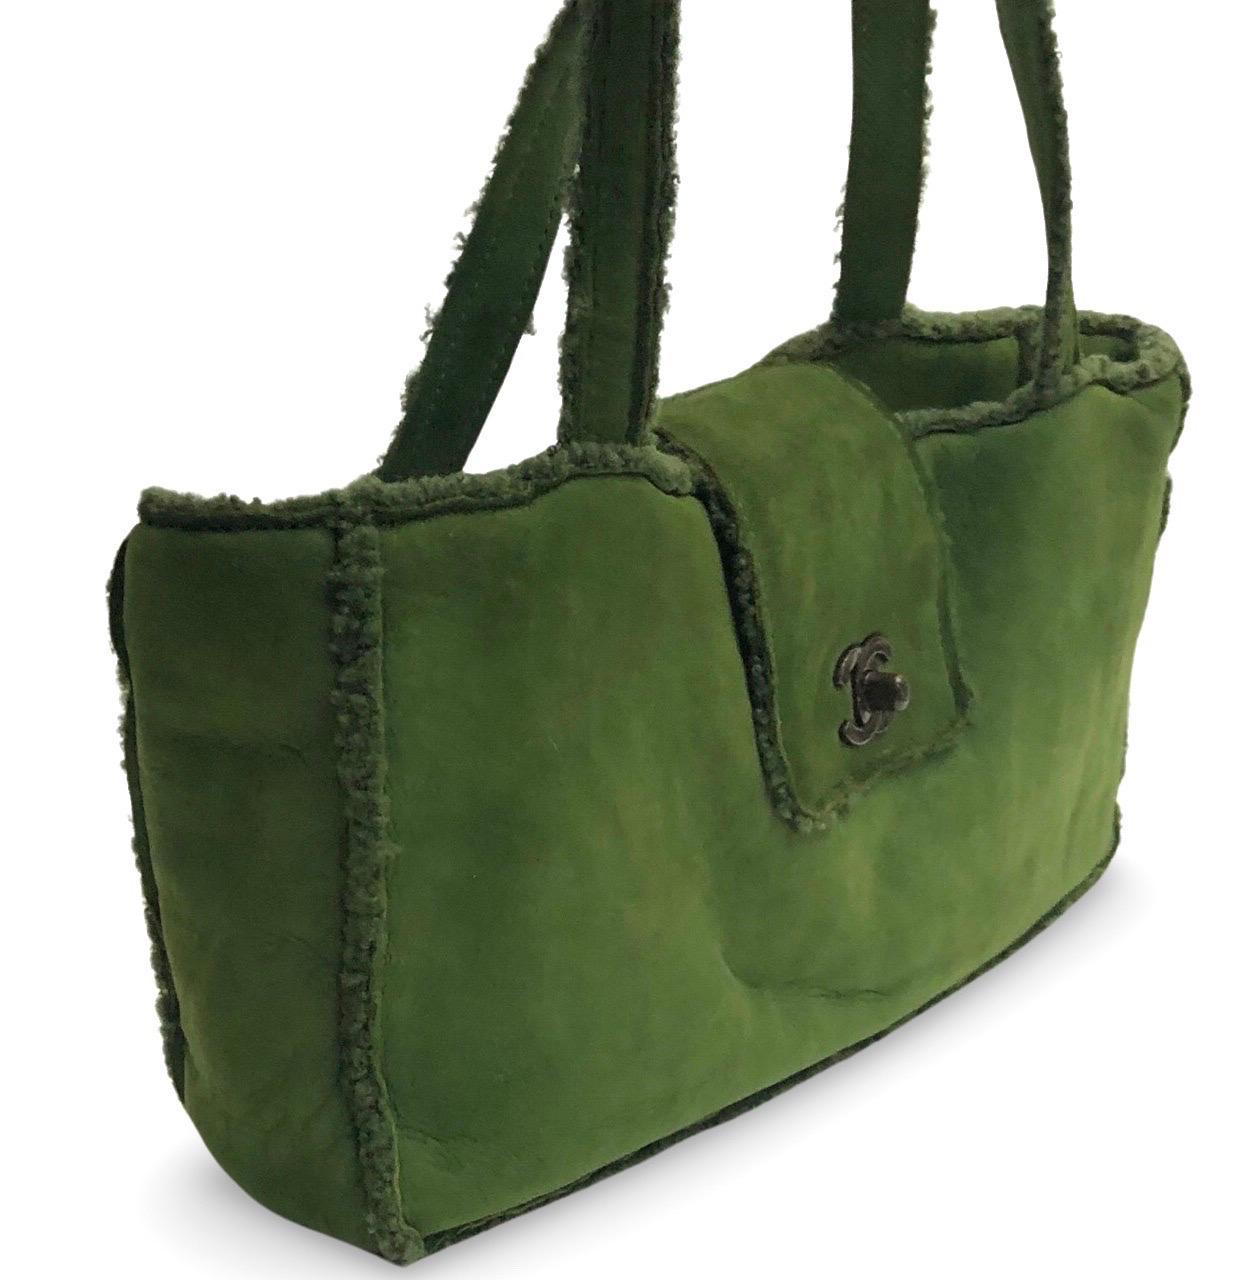 - Chanel green suede shoulder shoulder handbag from 1998 collection. 

- Featuring green shearling mouton trim overall. 

- CC turnlock flap closure. 

- Interior zip pocket. 

- Length: 32cm. Height: 16cm. Width: 7.5cm. Handle Drop: 18cm